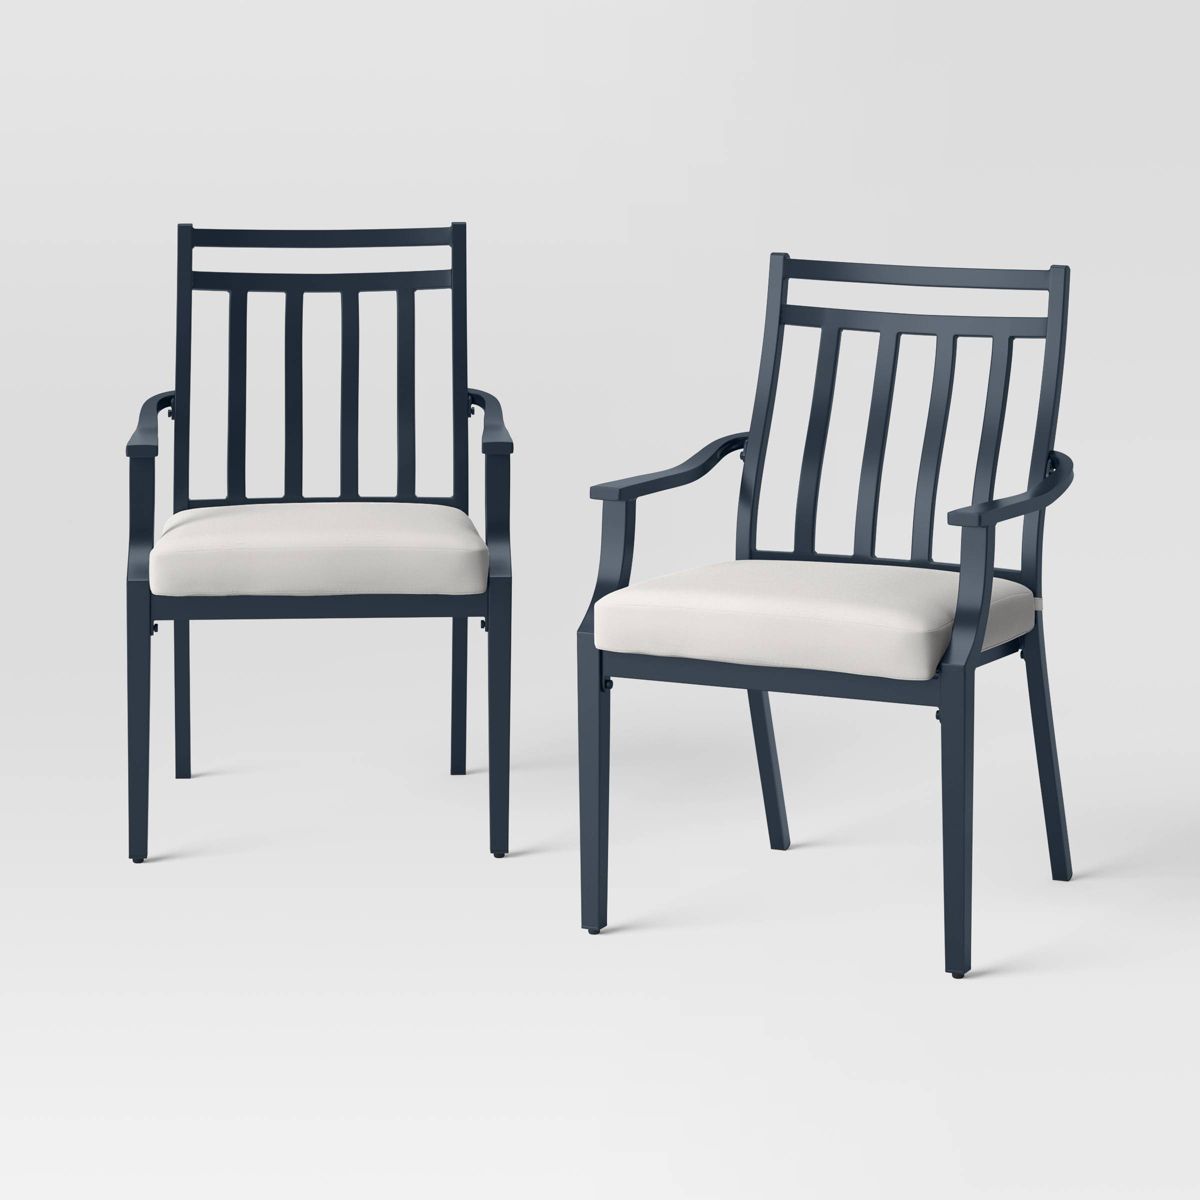 Fairmont 2pk Stationary Patio Dining Chairs, Outdoor Furniture - Linen - Threshold™ | Target